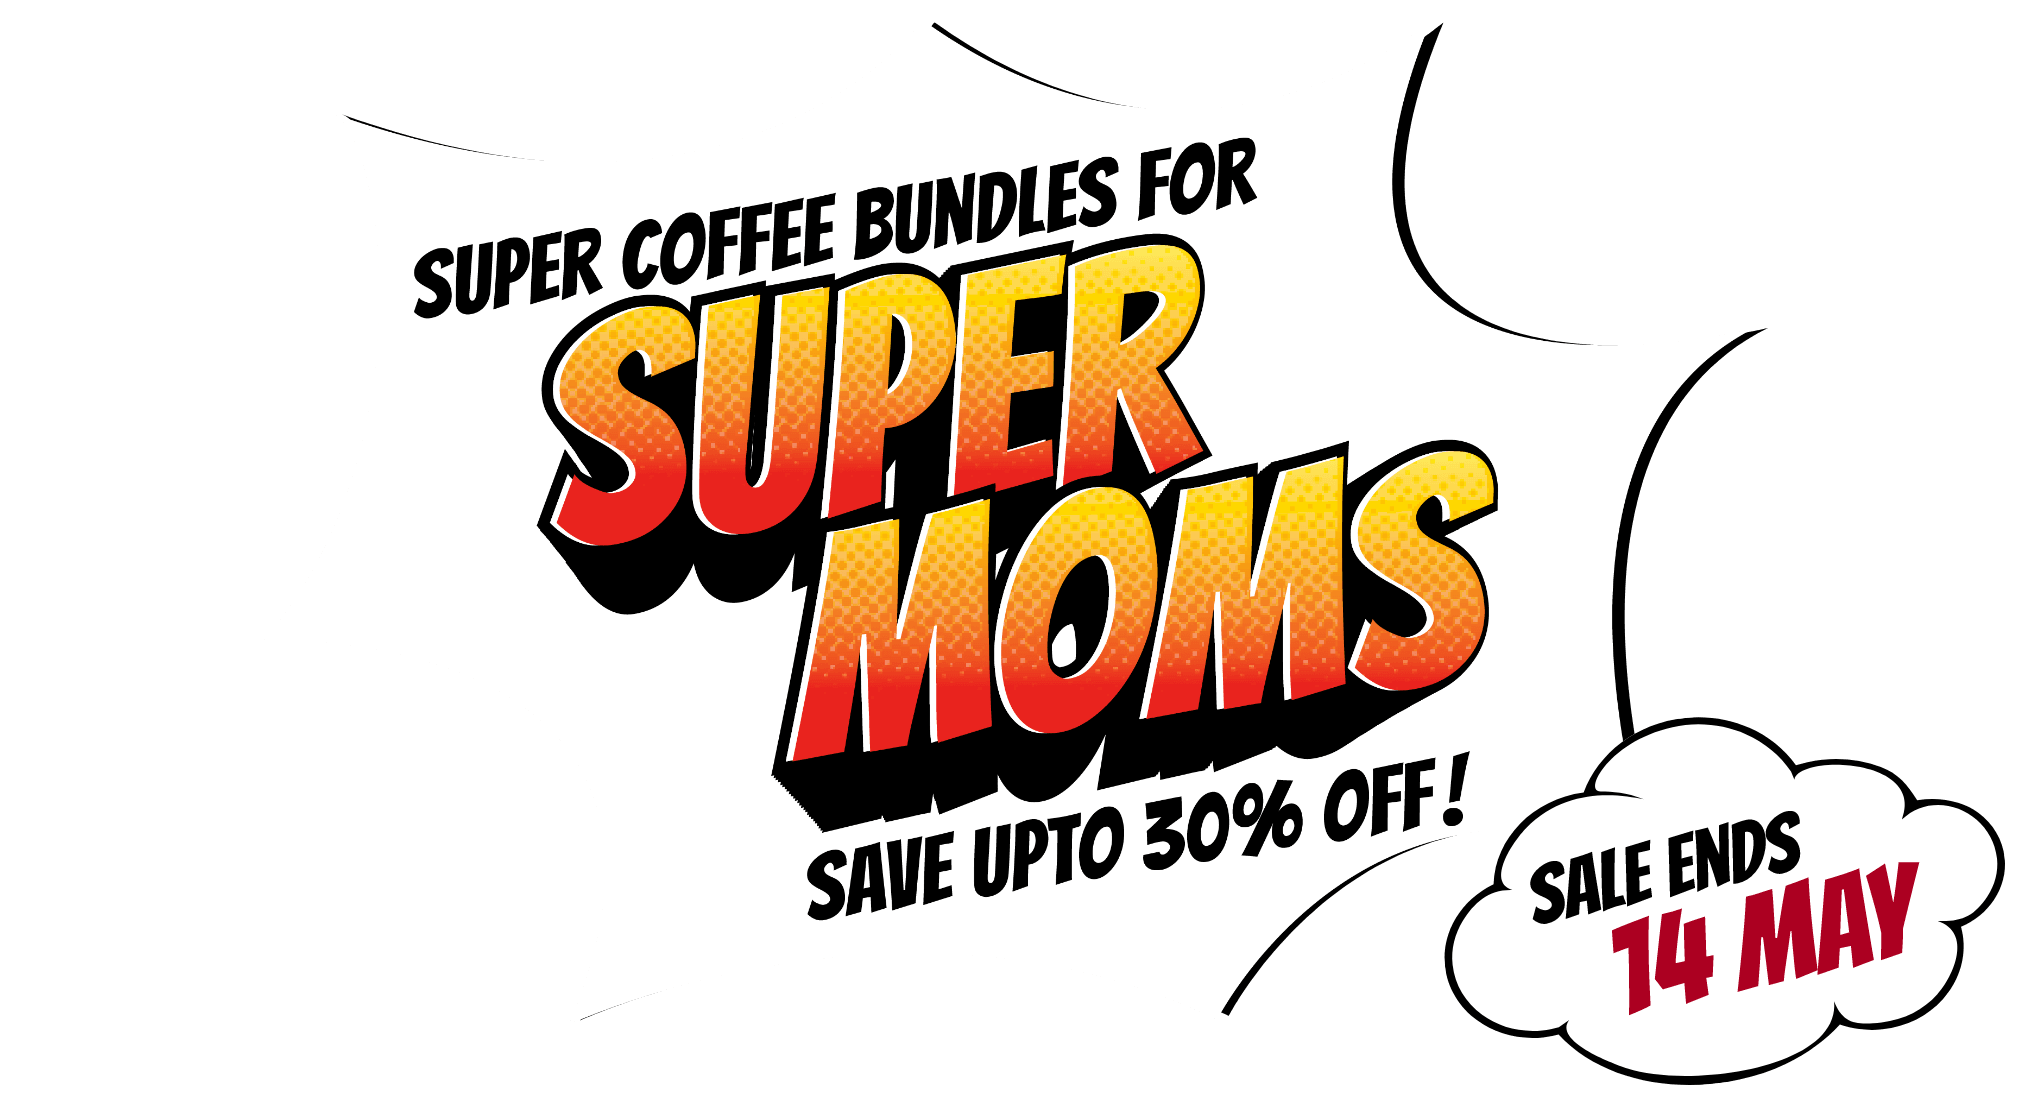 EspressoWorks Mothers Day Sale with Super Coffee Bundles For Super Moms, Save up to 30% Off, Sale Ends on May 14